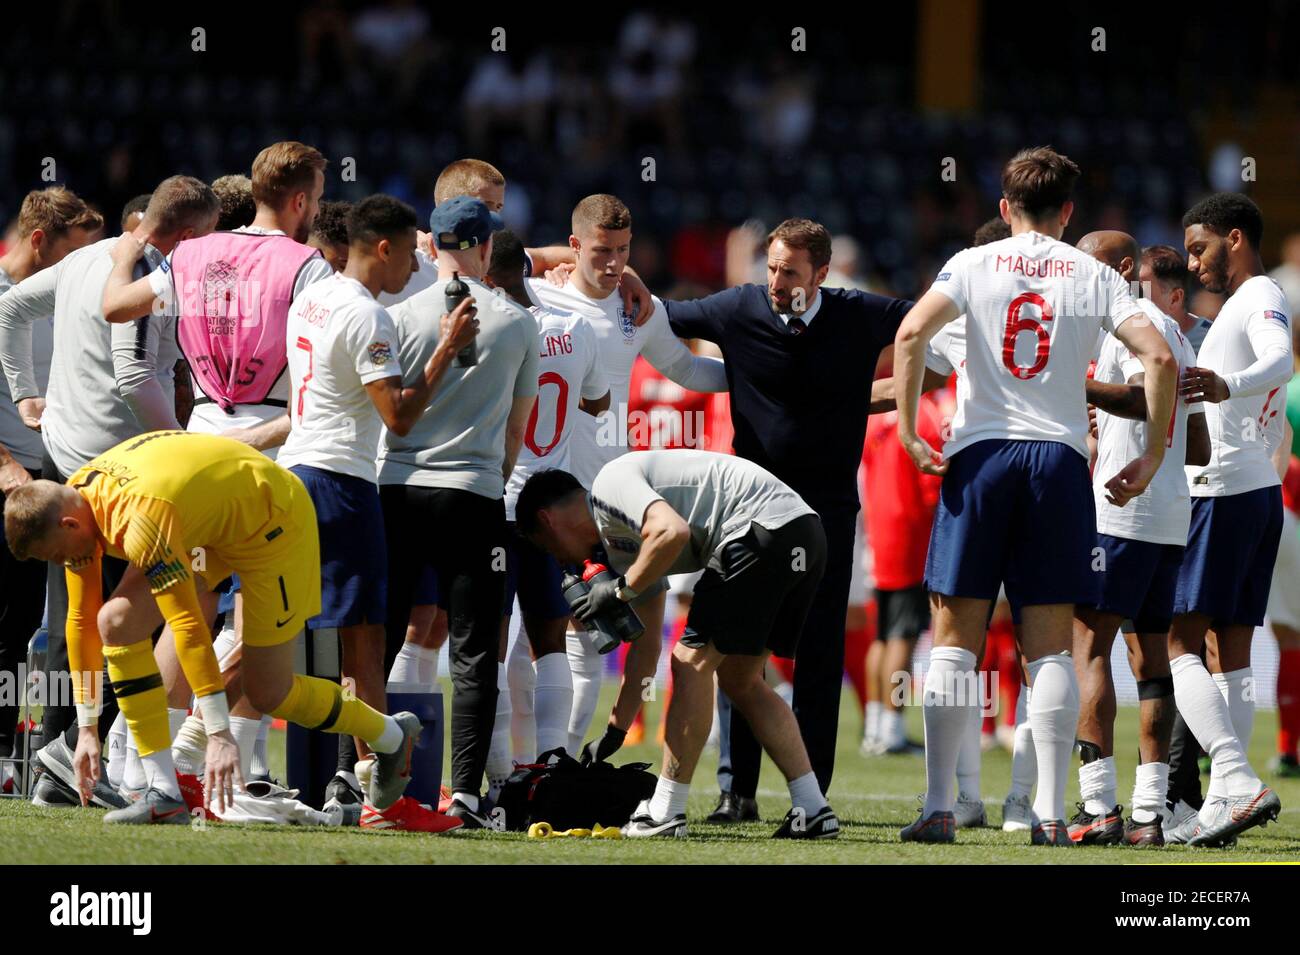 Soccer Football - UEFA Nations League - Third Place Play Off - Switzerland  v England - Estadio D. Afonso Henriques, Guimaraes, Portugal - June 9, 2019  England manager Gareth Southgate gives instructions